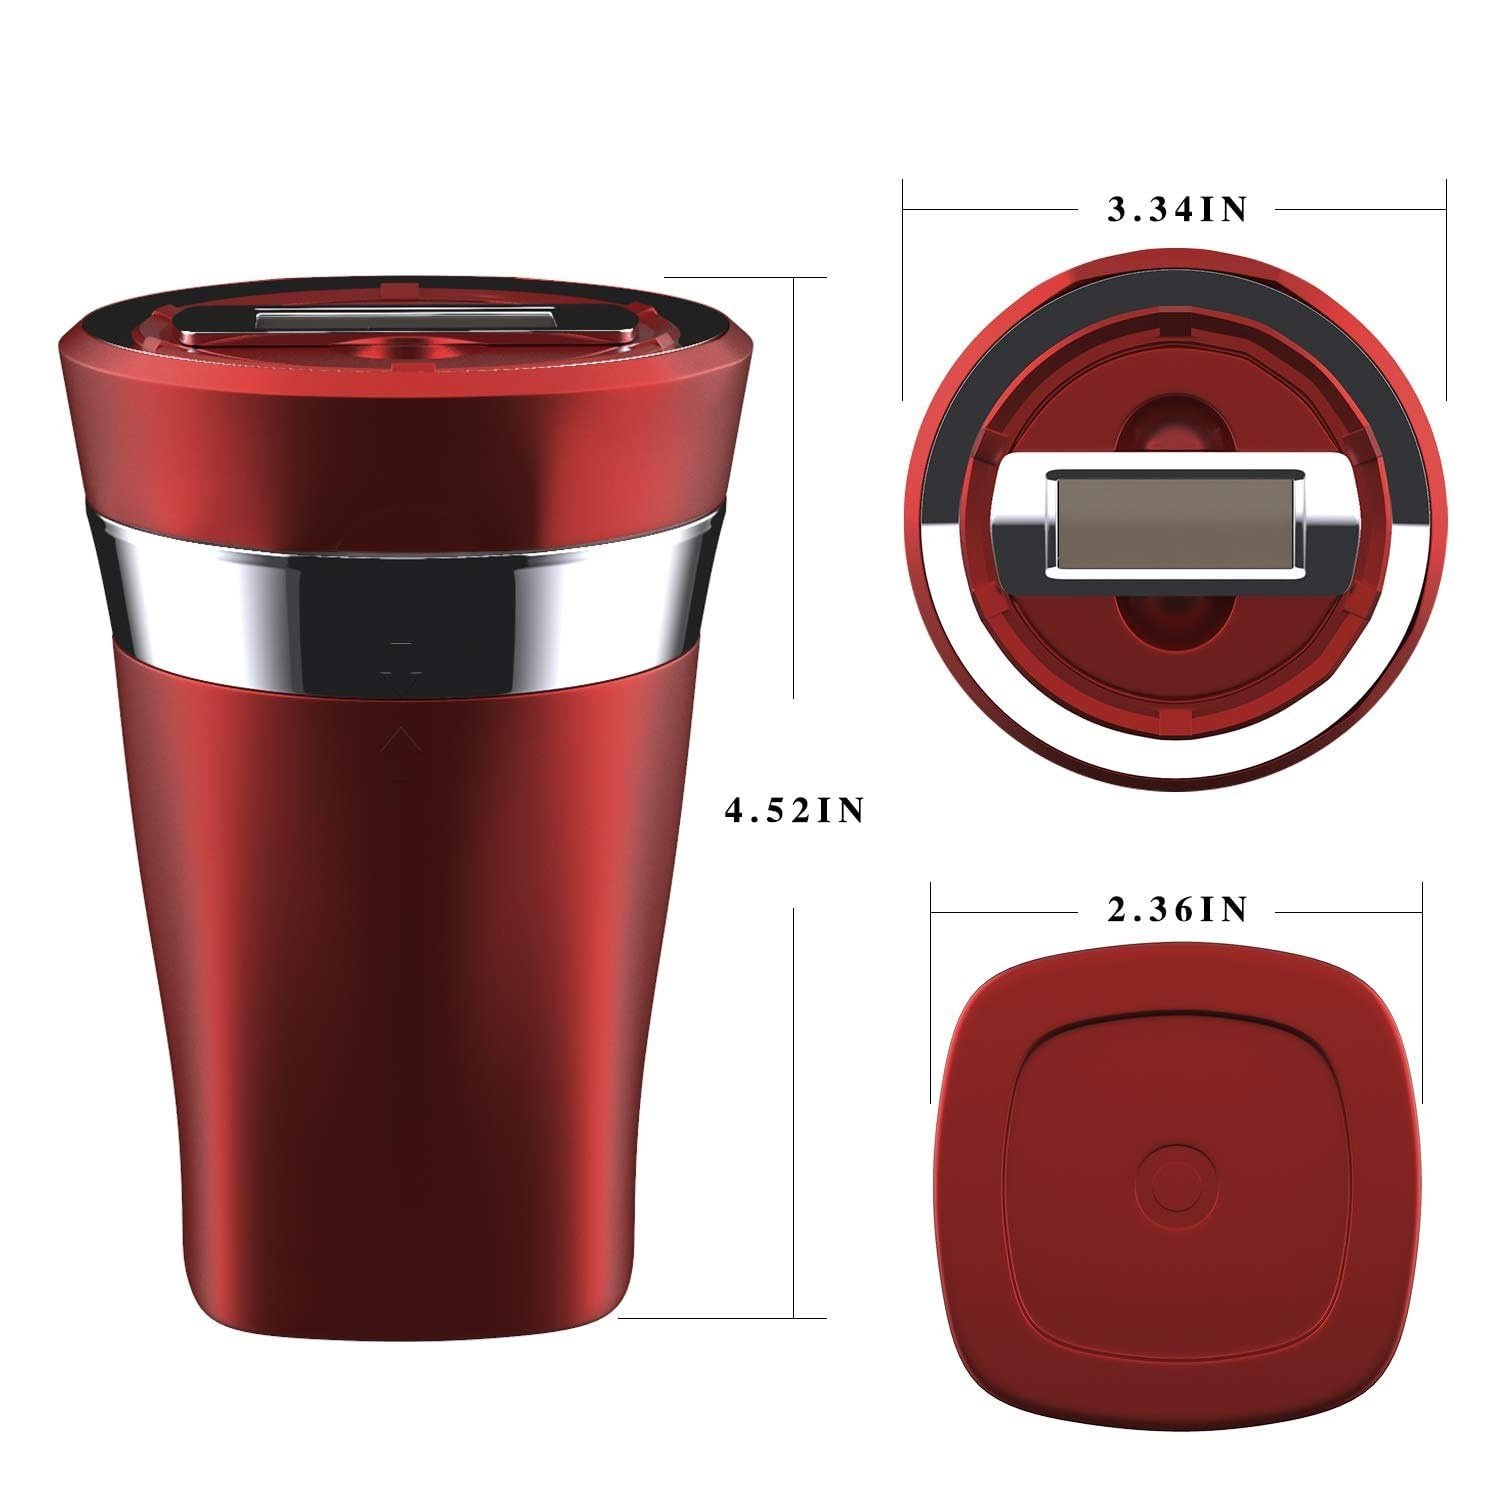 Car Ashtray Electronic Cigarette Lighter Detachable Solar Powered/USB Rechargeable with Lid Blue LED Light For Most Car Cup Holder (Red) Image 